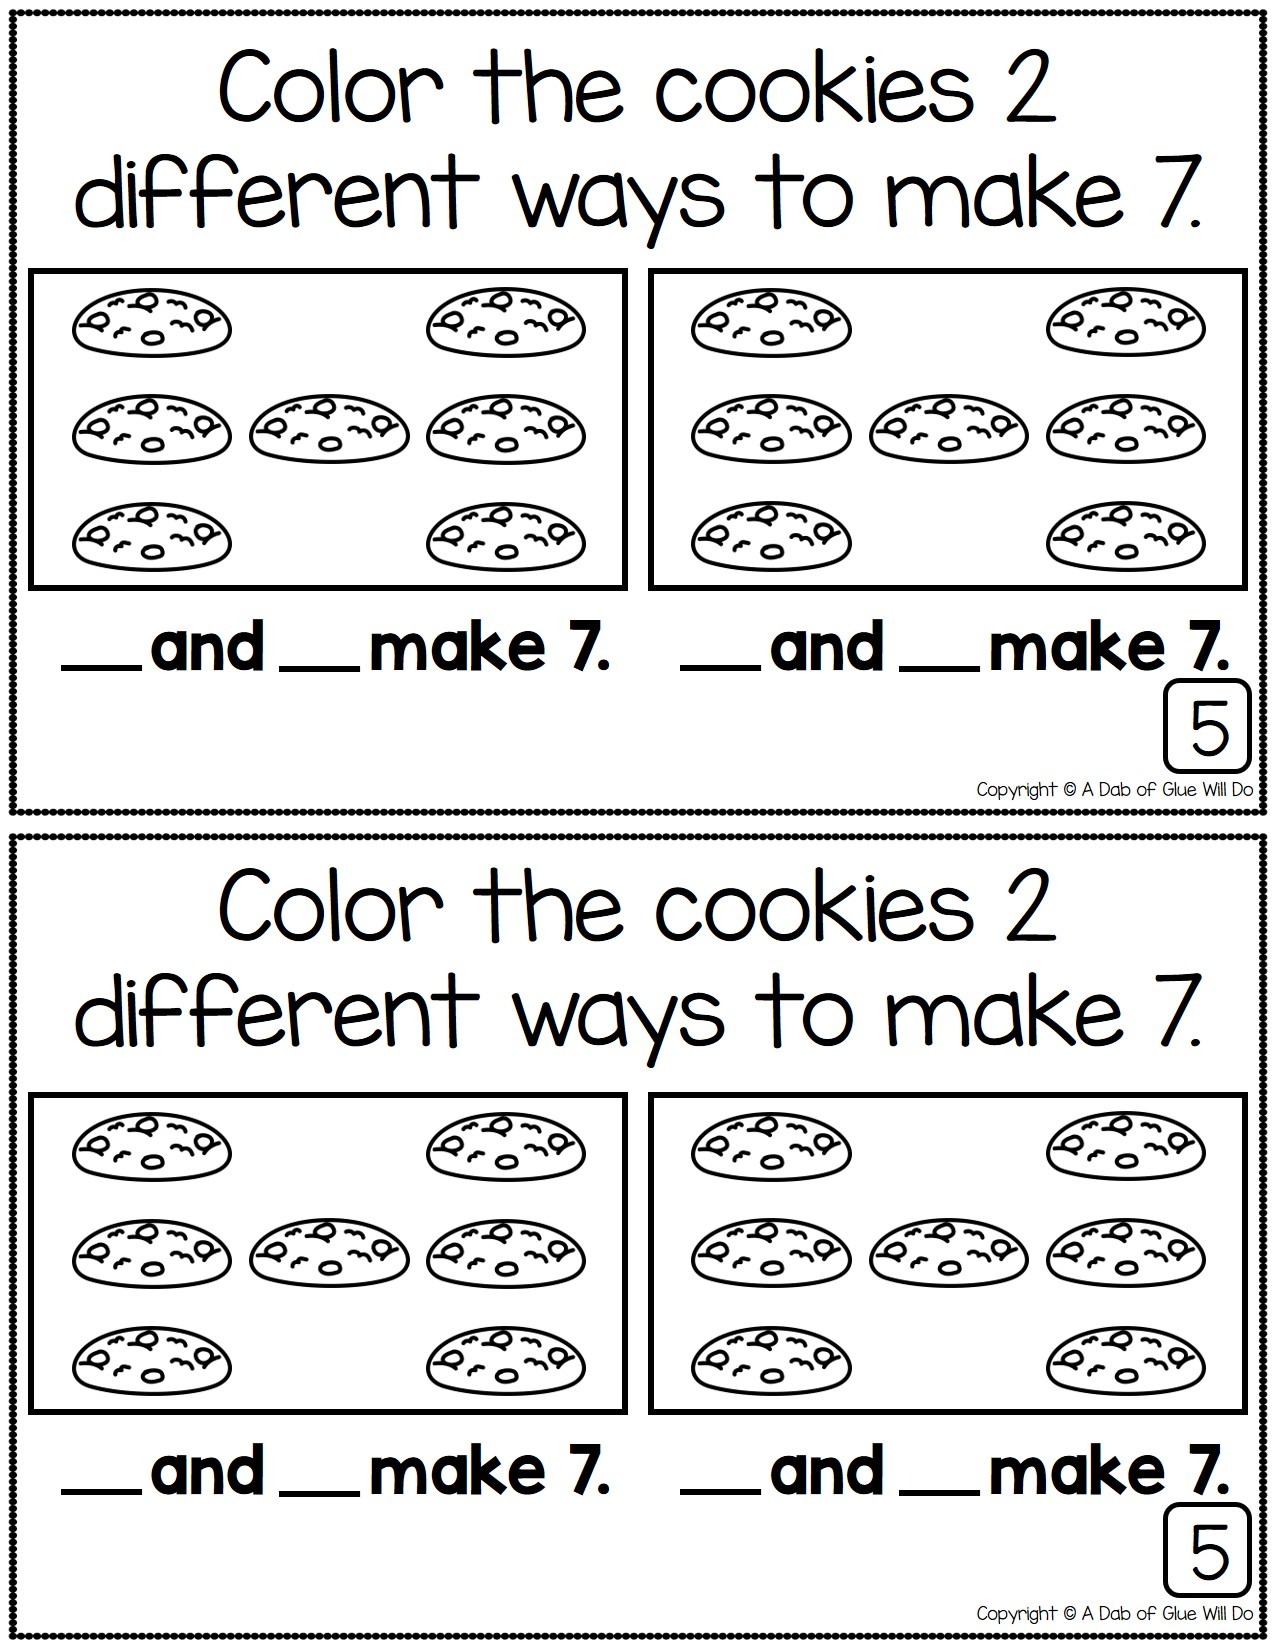 decomposing-numbers-math-review-journal-for-kindergarten-a-dab-of